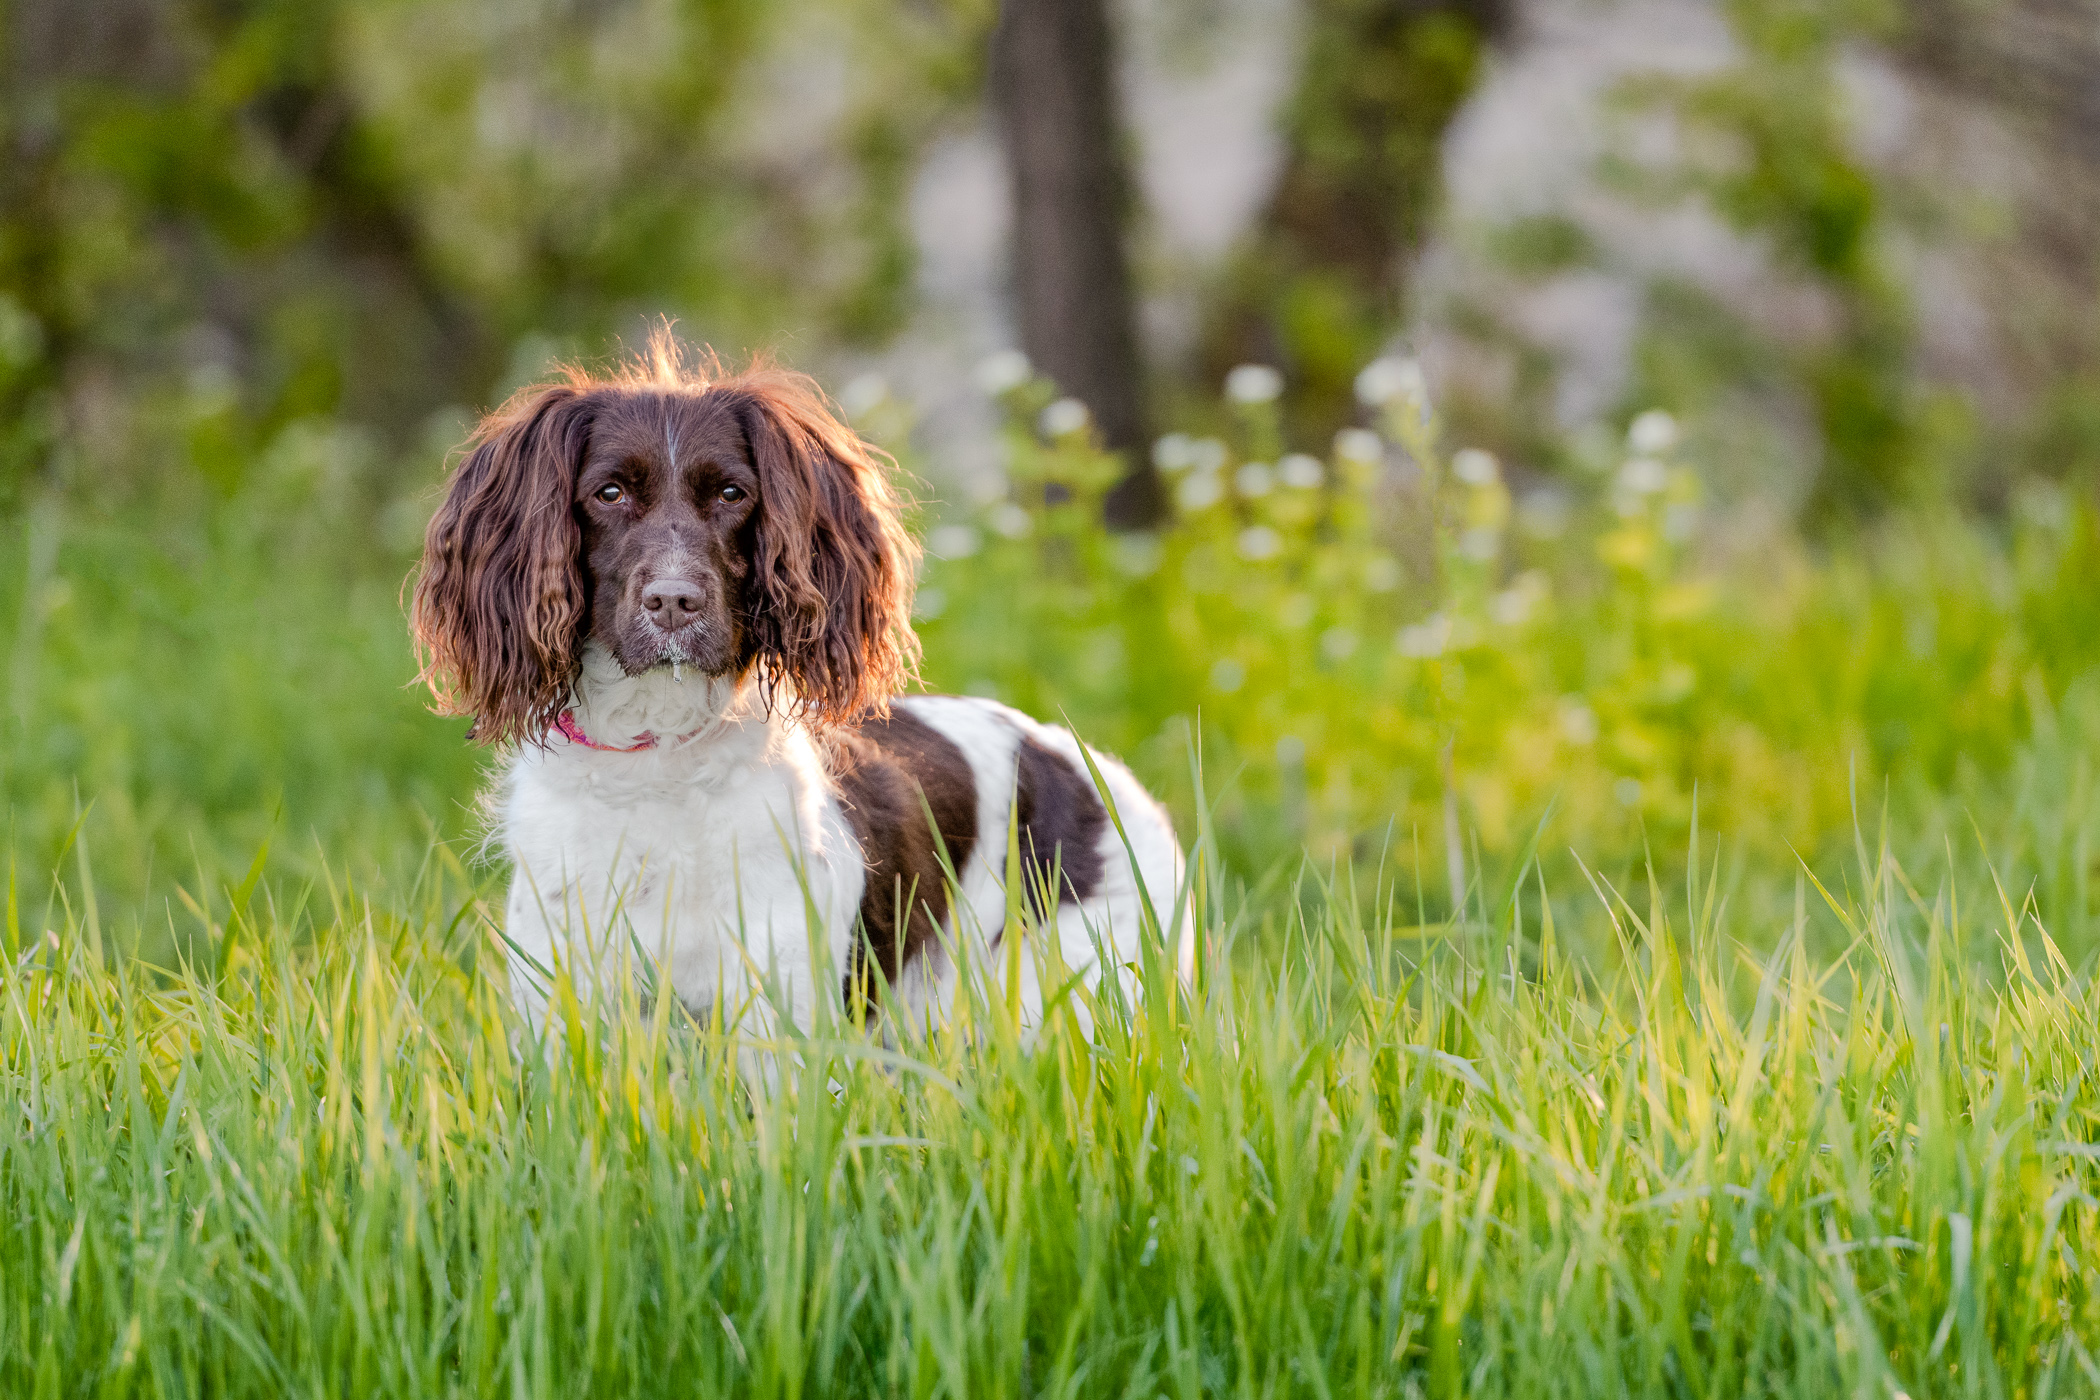 An English Springer Spaniel stands in the tall grass at the Milennium Park in Grand Rapids, MI.